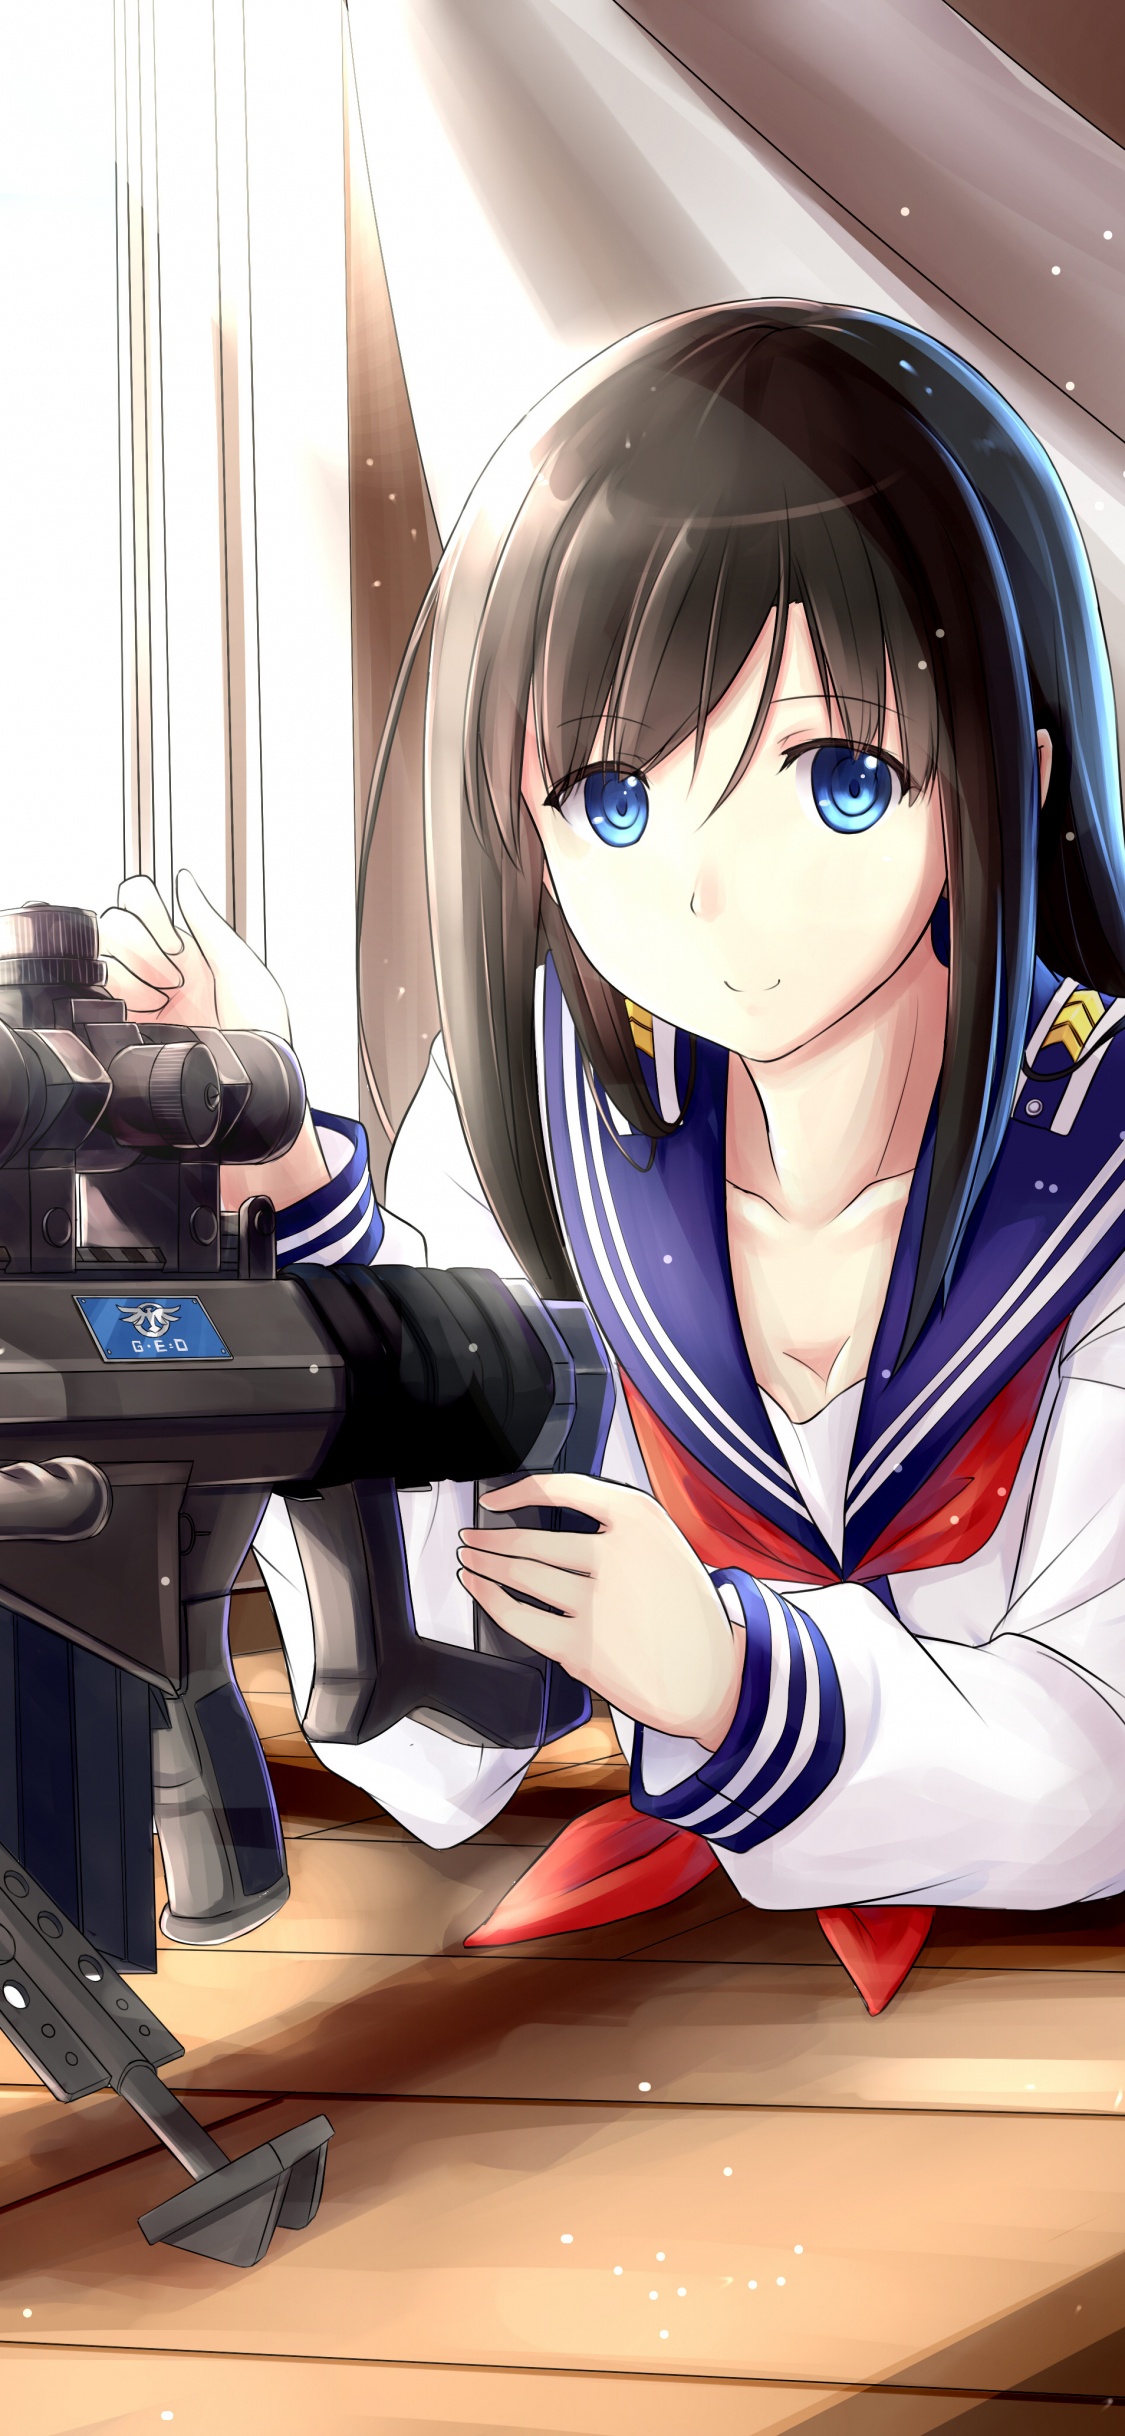 Woman in White and Blue Jacket Holding Black Rifle. Wallpaper in 1125x2436 Resolution